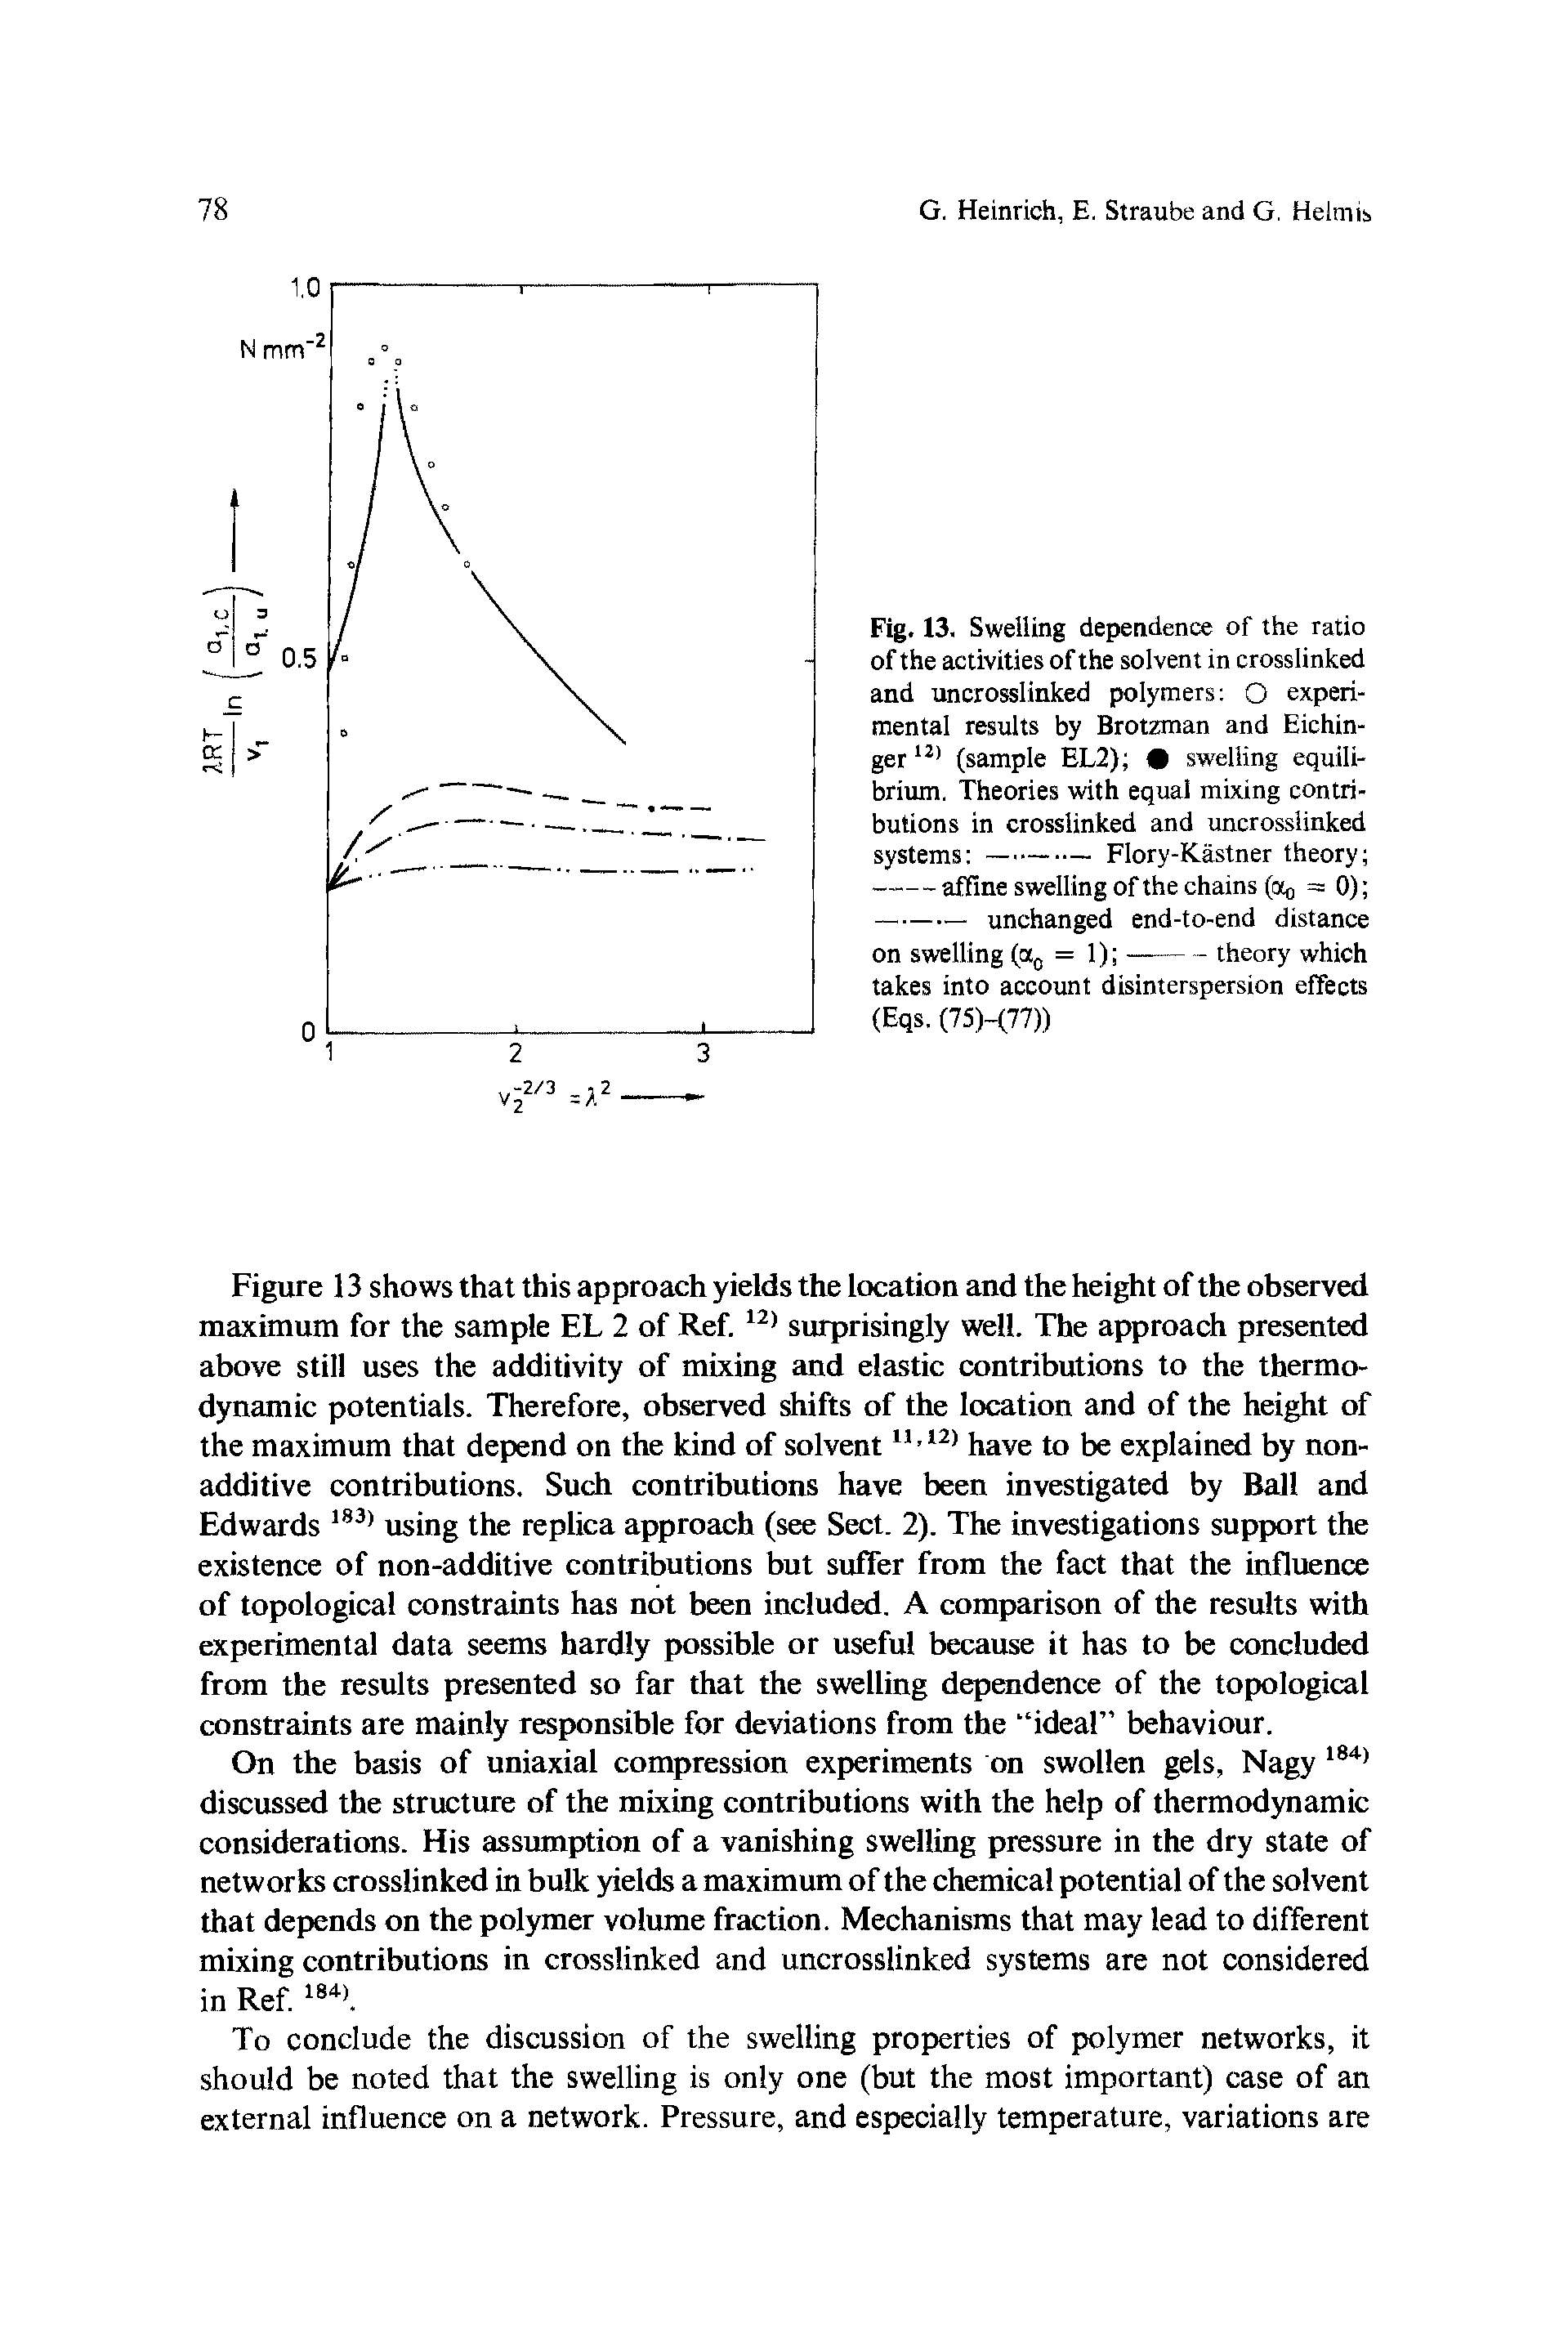 Fig. 13. Swelling dependence of the ratio of the activities of the solvent in crosslinked and uncrosslinked polymers O experimental results by Brotzman and Eichin-ger (sample EL2) swelling equilibrium. Theories with equal mixing contributions in crosslinked and uncrosslinked...